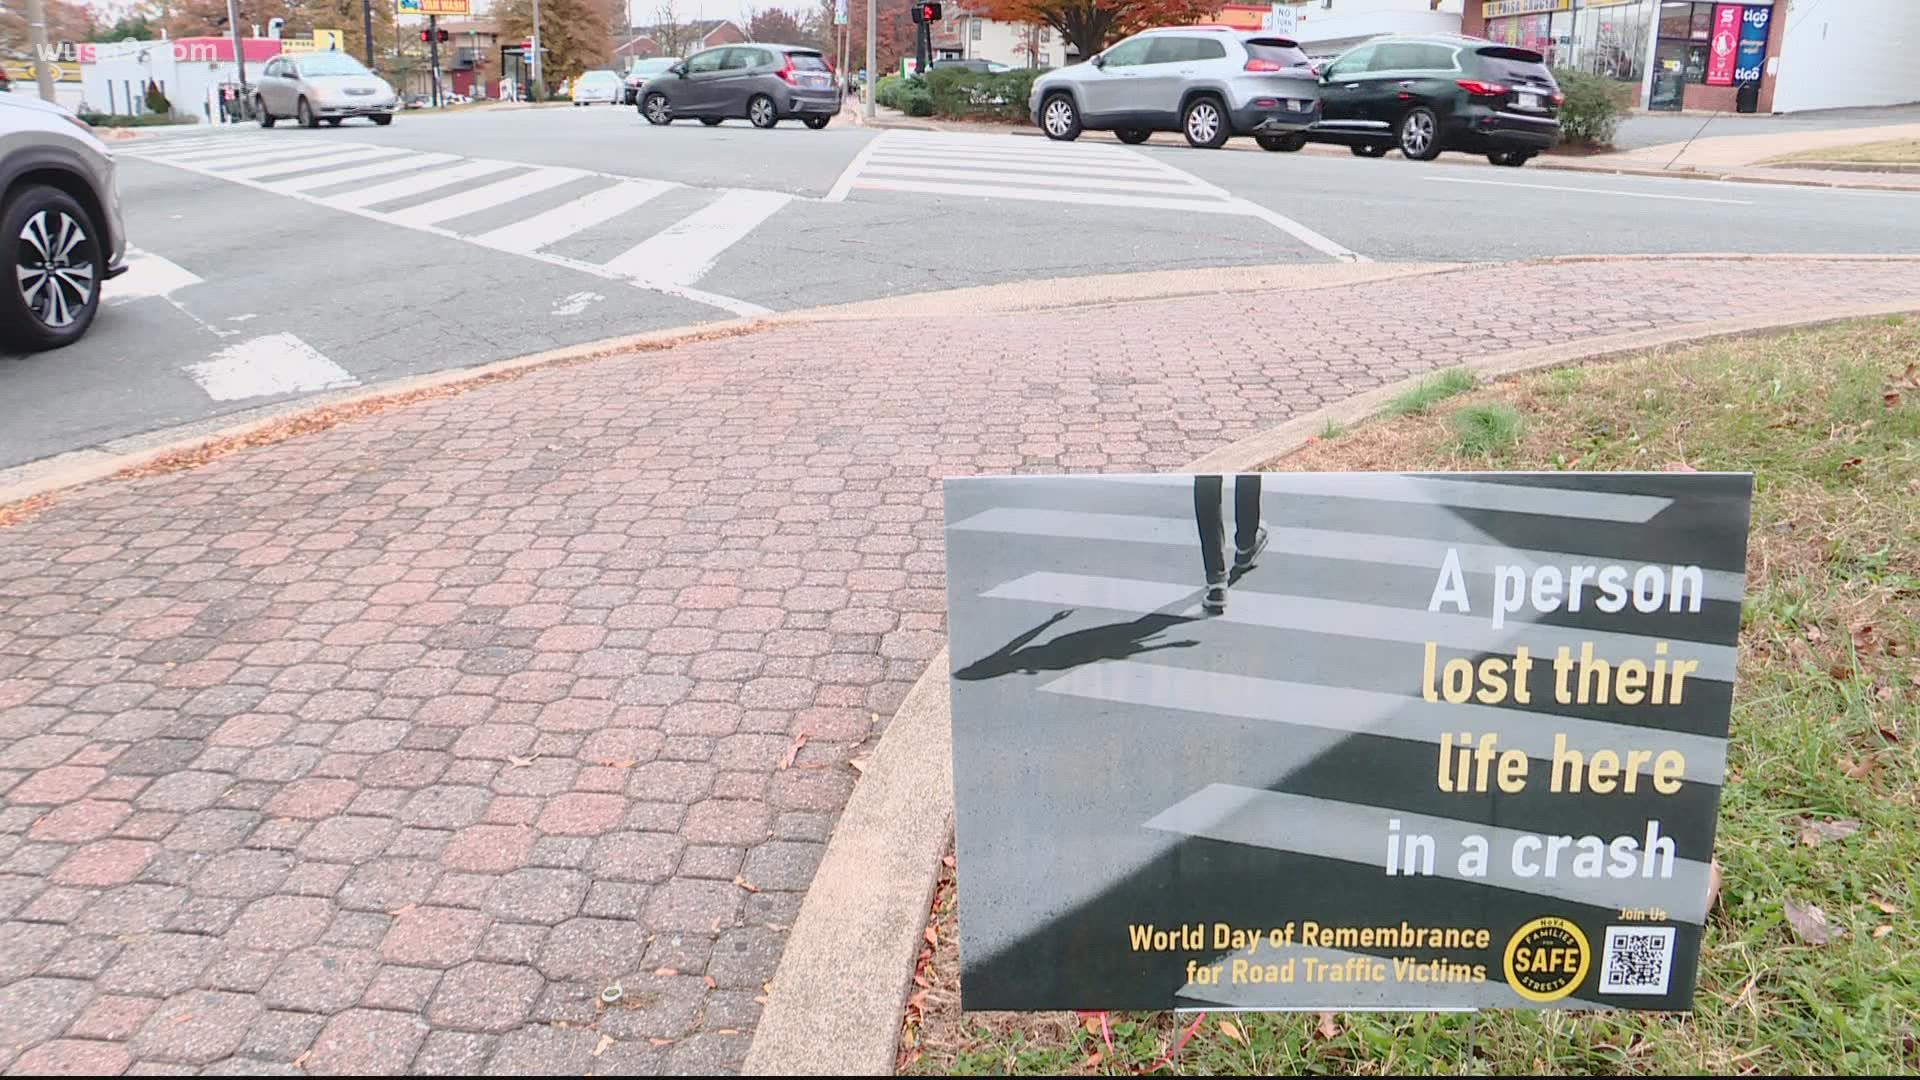 After a week of multiple deadly pedestrian crashes in the region, Alexandria, Va. safe street advocates are renewing their efforts to make local streets safer.